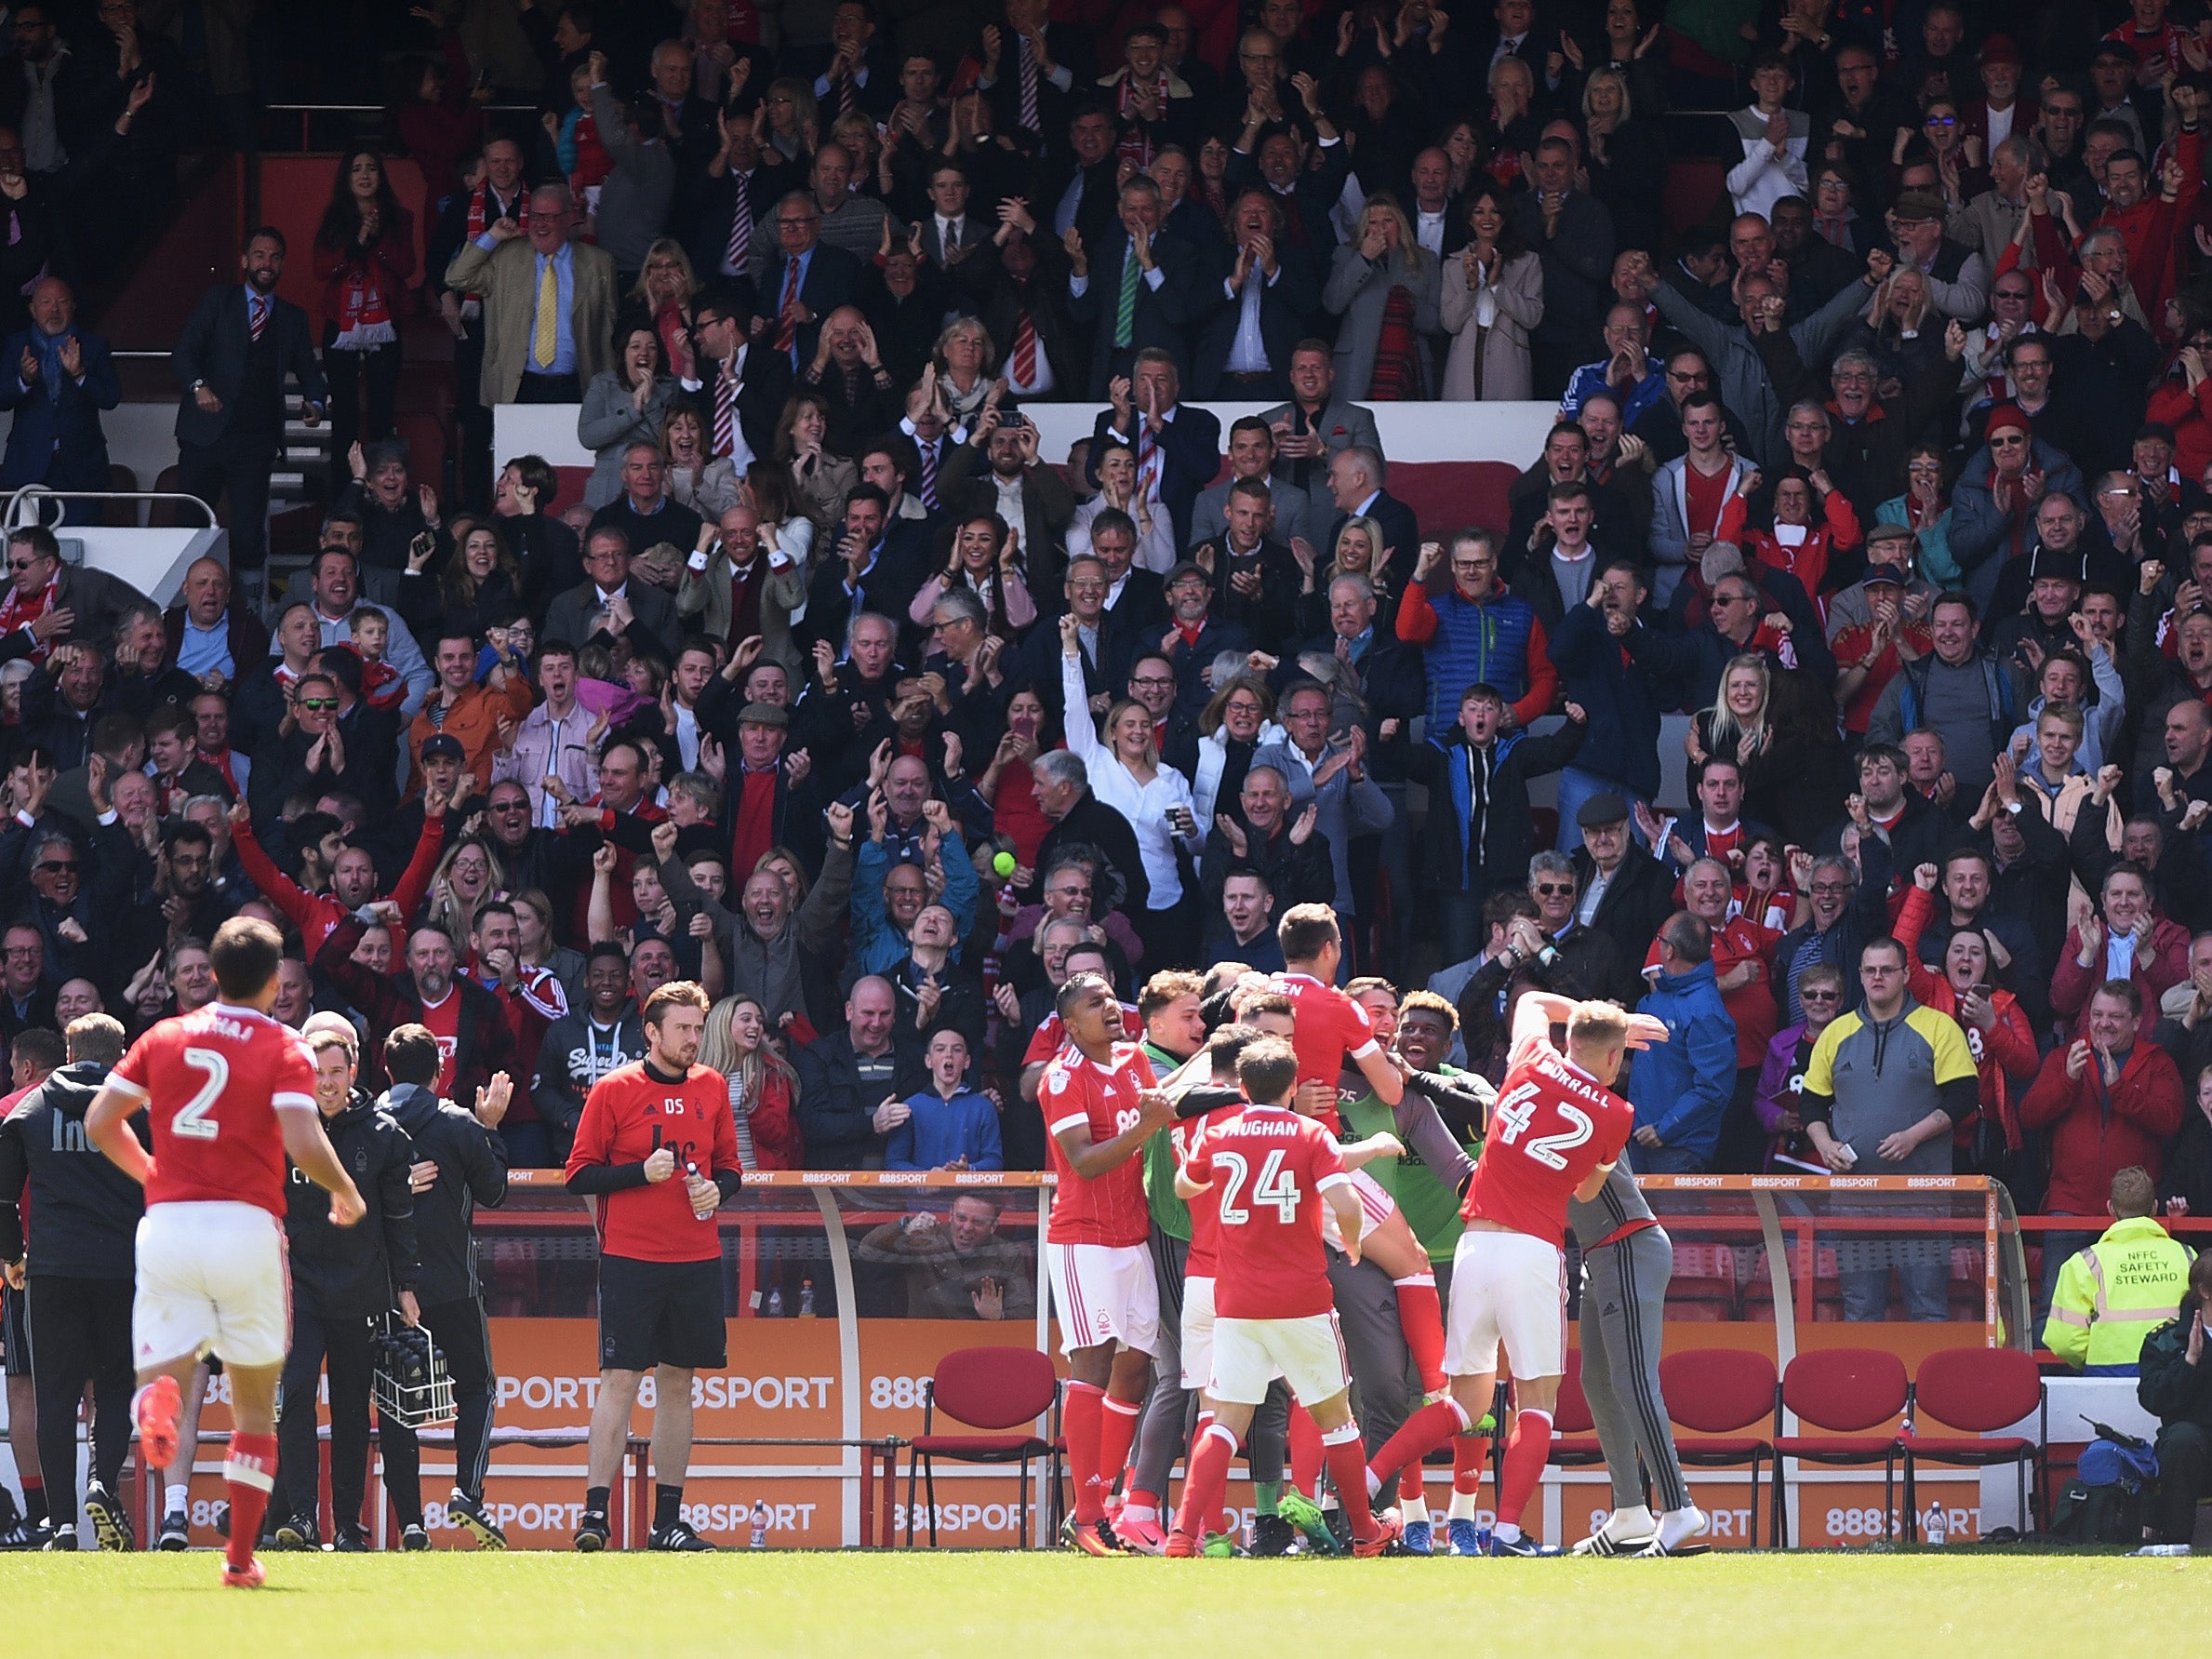 Forest celebrate remaining in the Championship at the end of the match